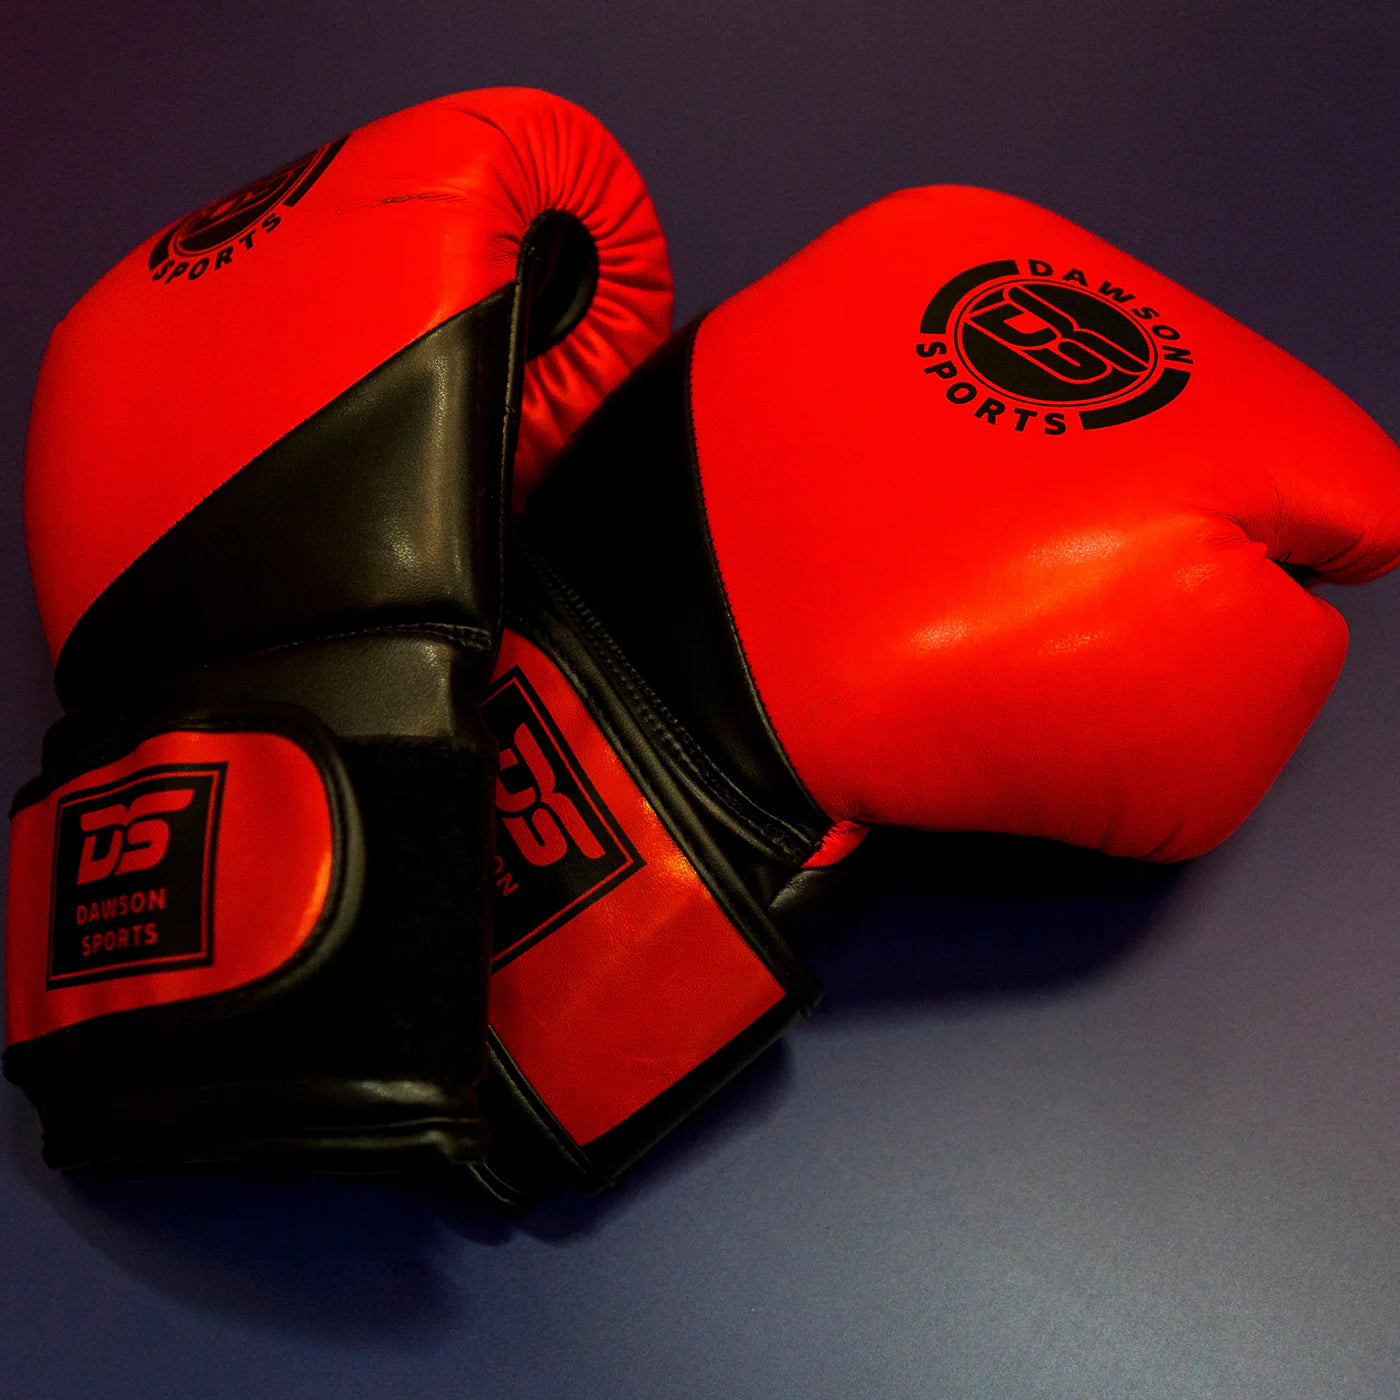 Sparring Club Training Gloves PU 8 oz – Red/Blk